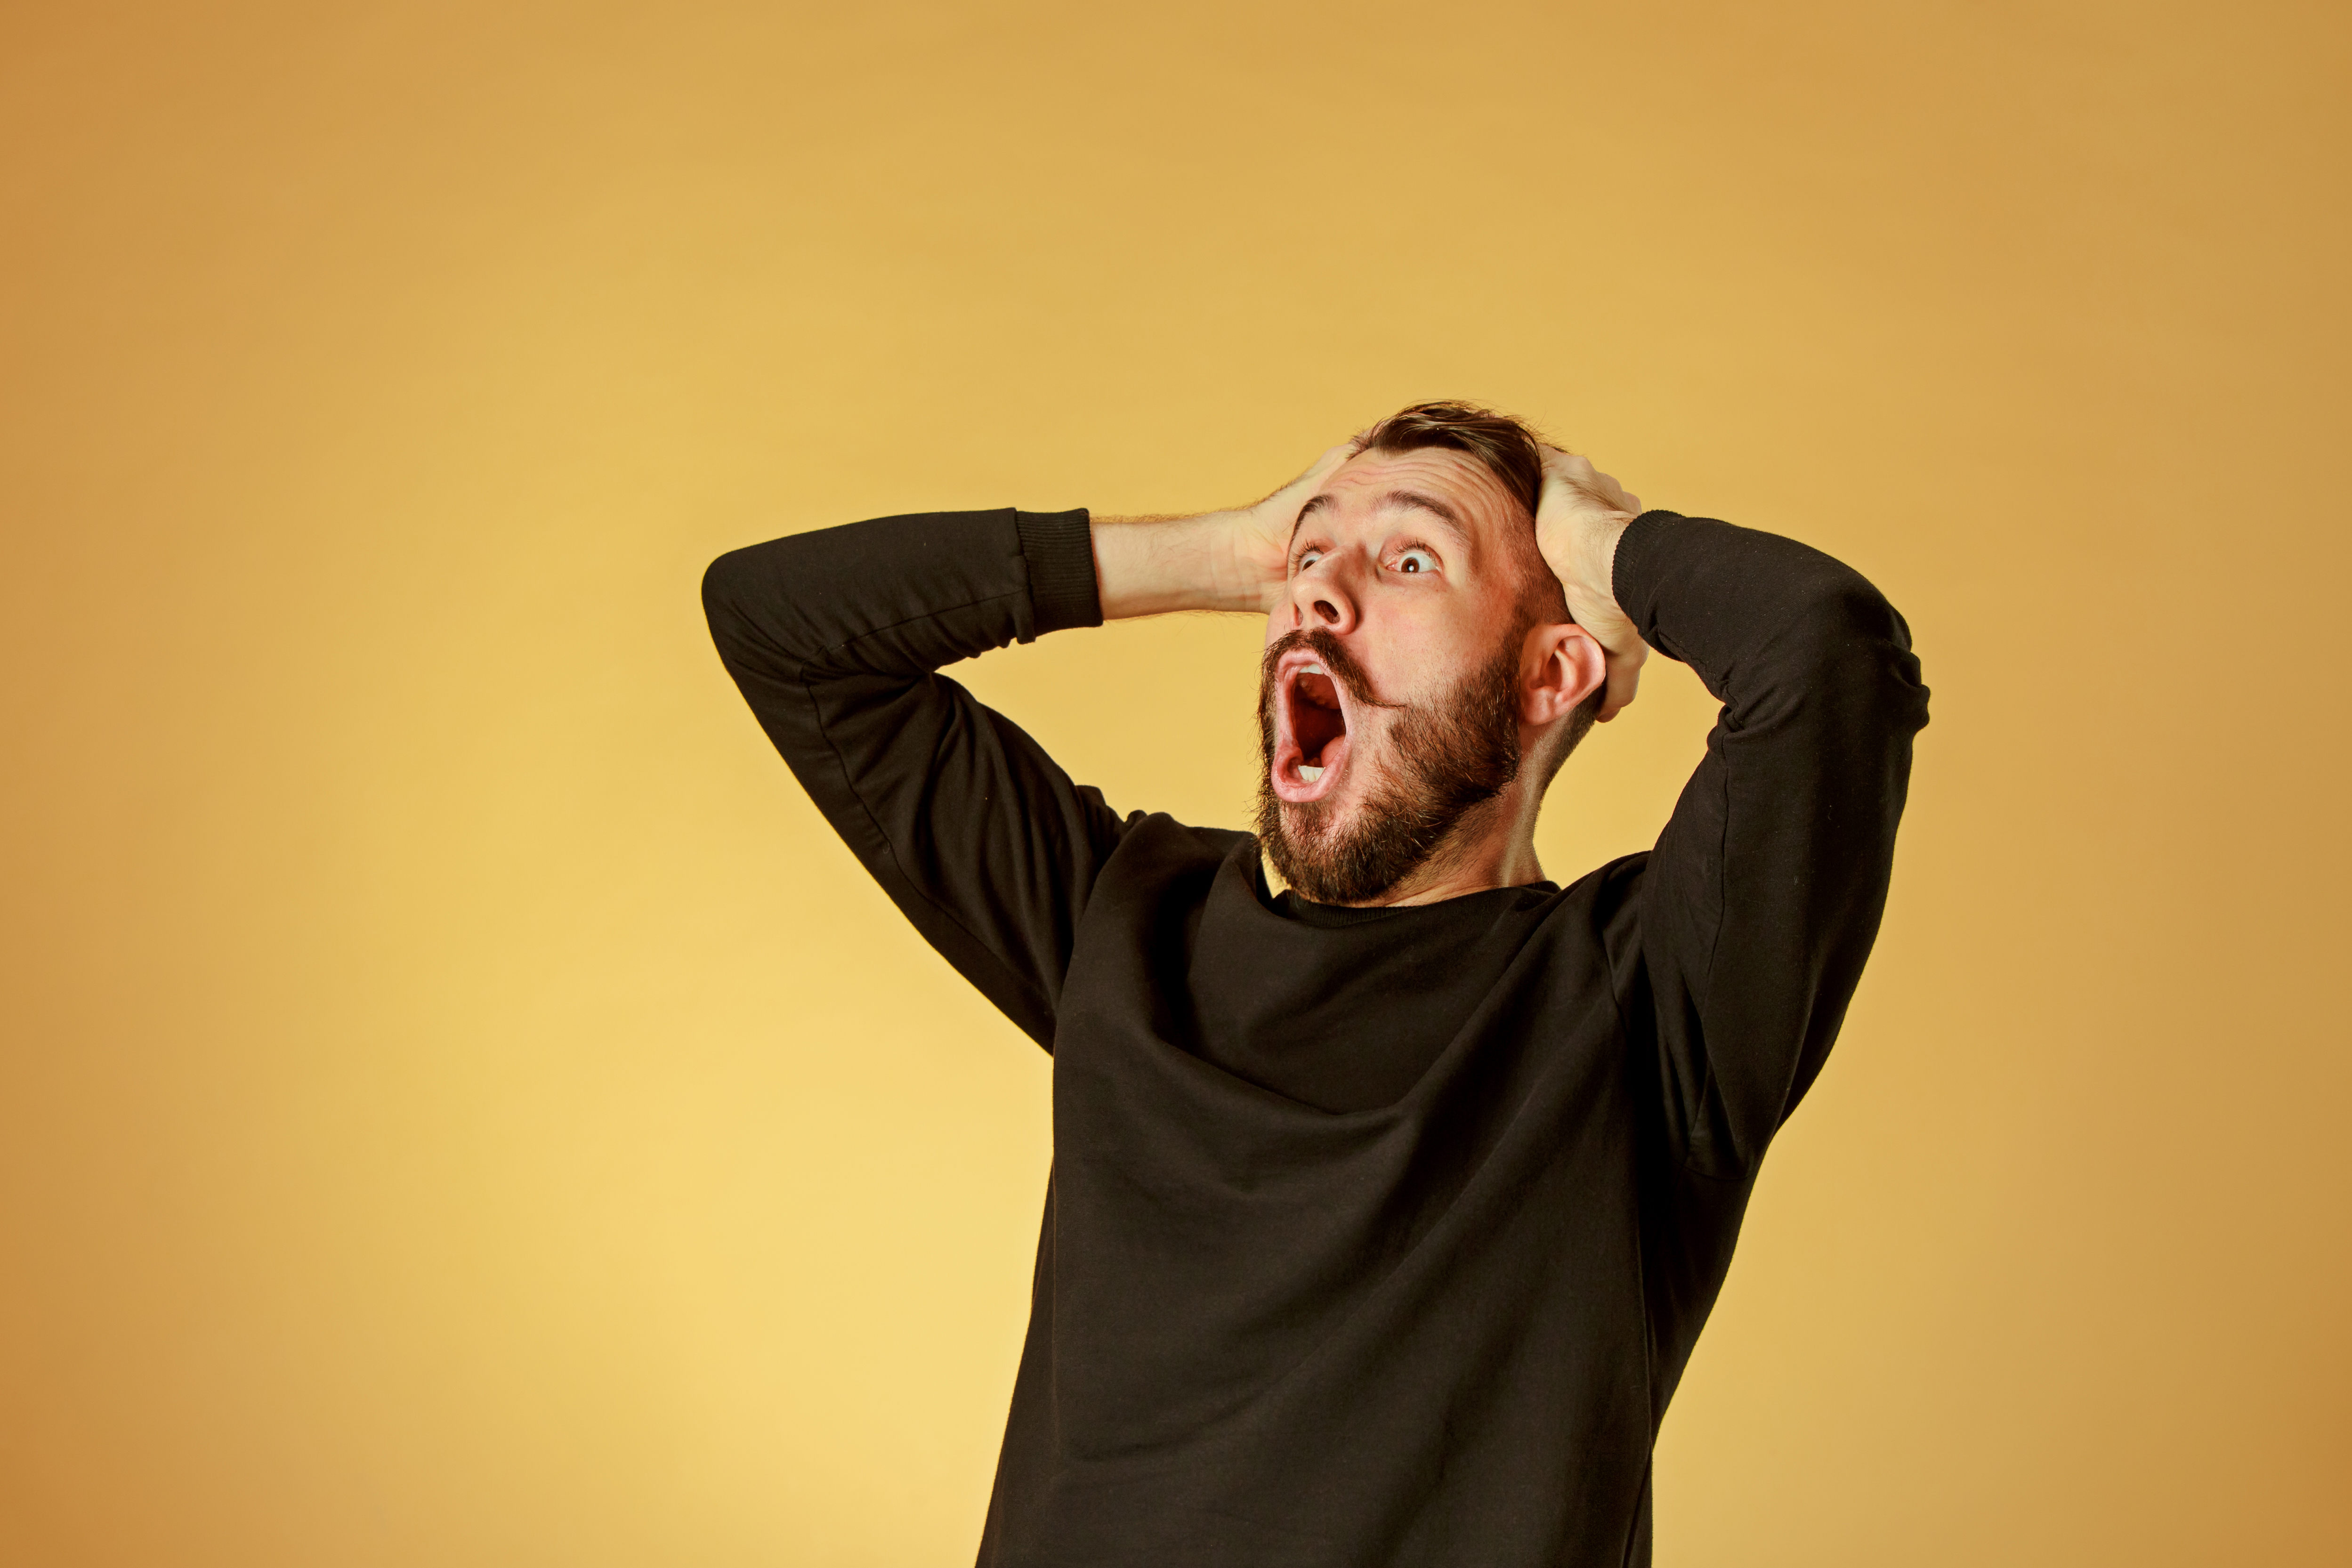 A shocked young man holding his head | Source: Shutterstock